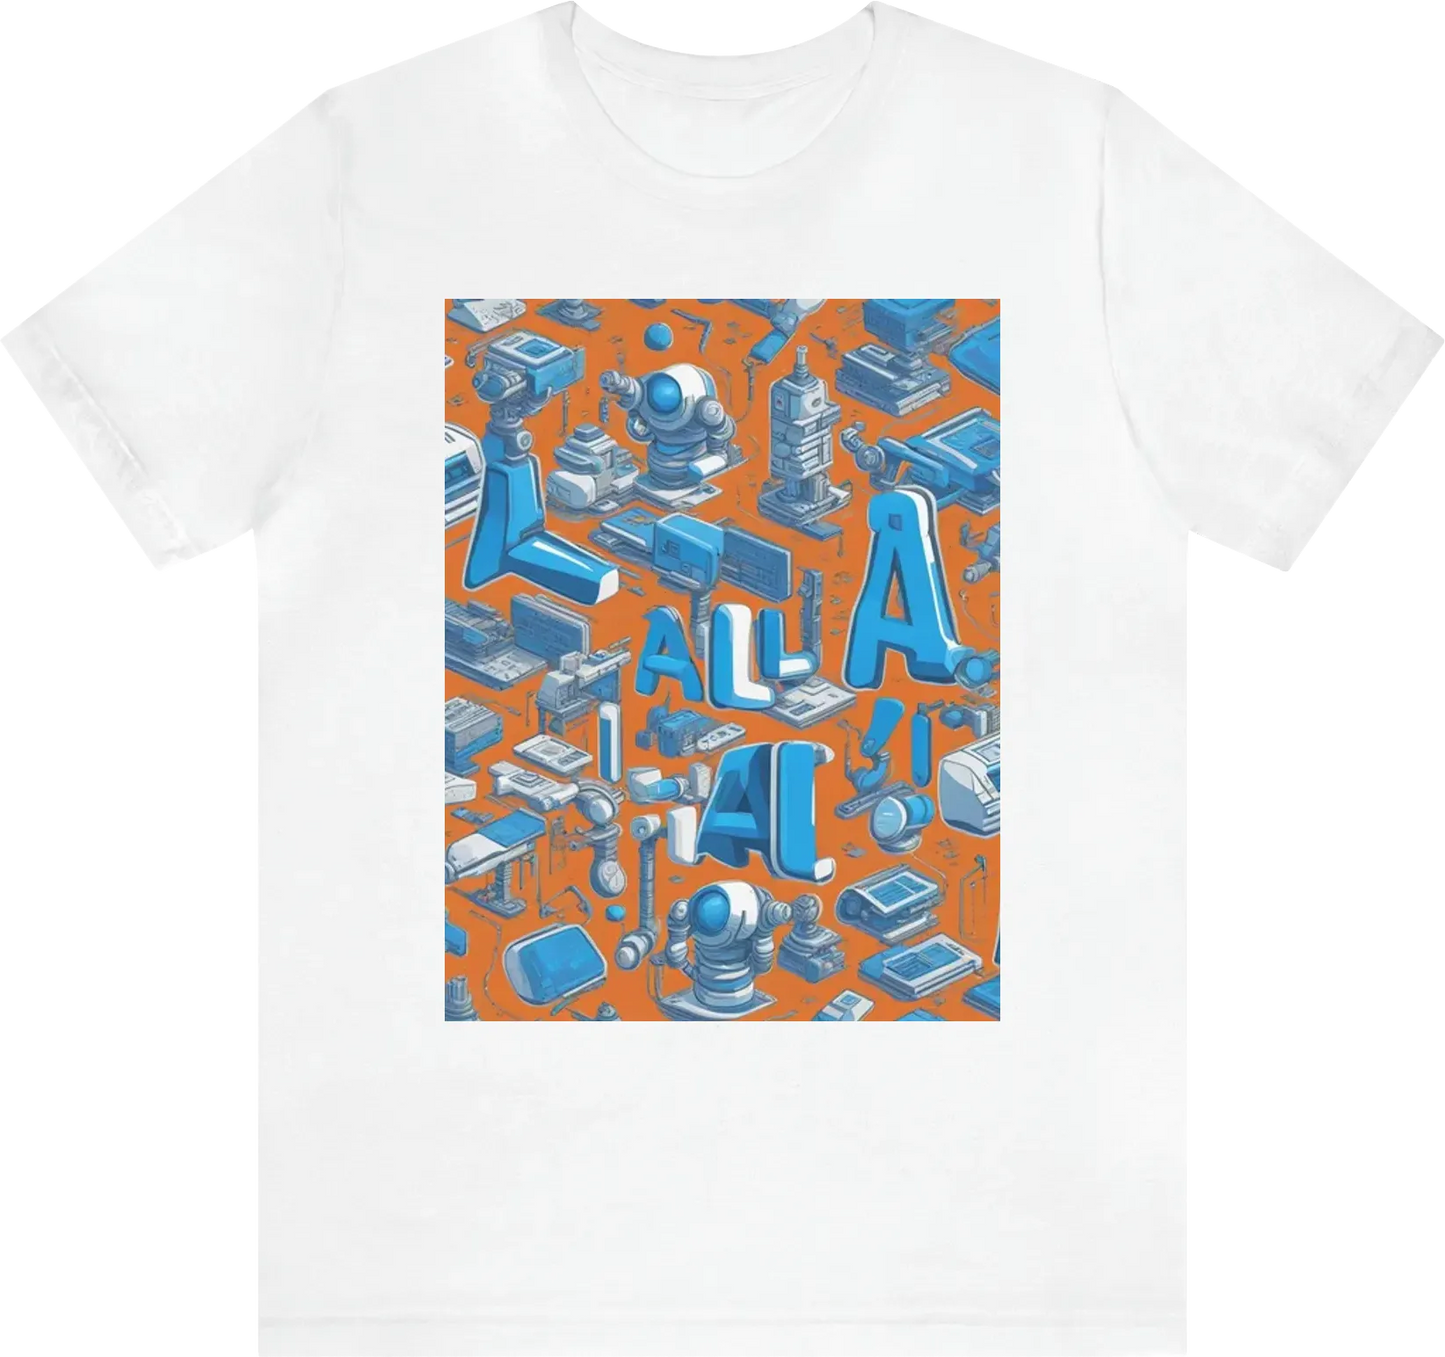 “I want an AI T-shirt design with the text ‘AI is the future’ in bold letters, using the color blue and a futuristic font.”